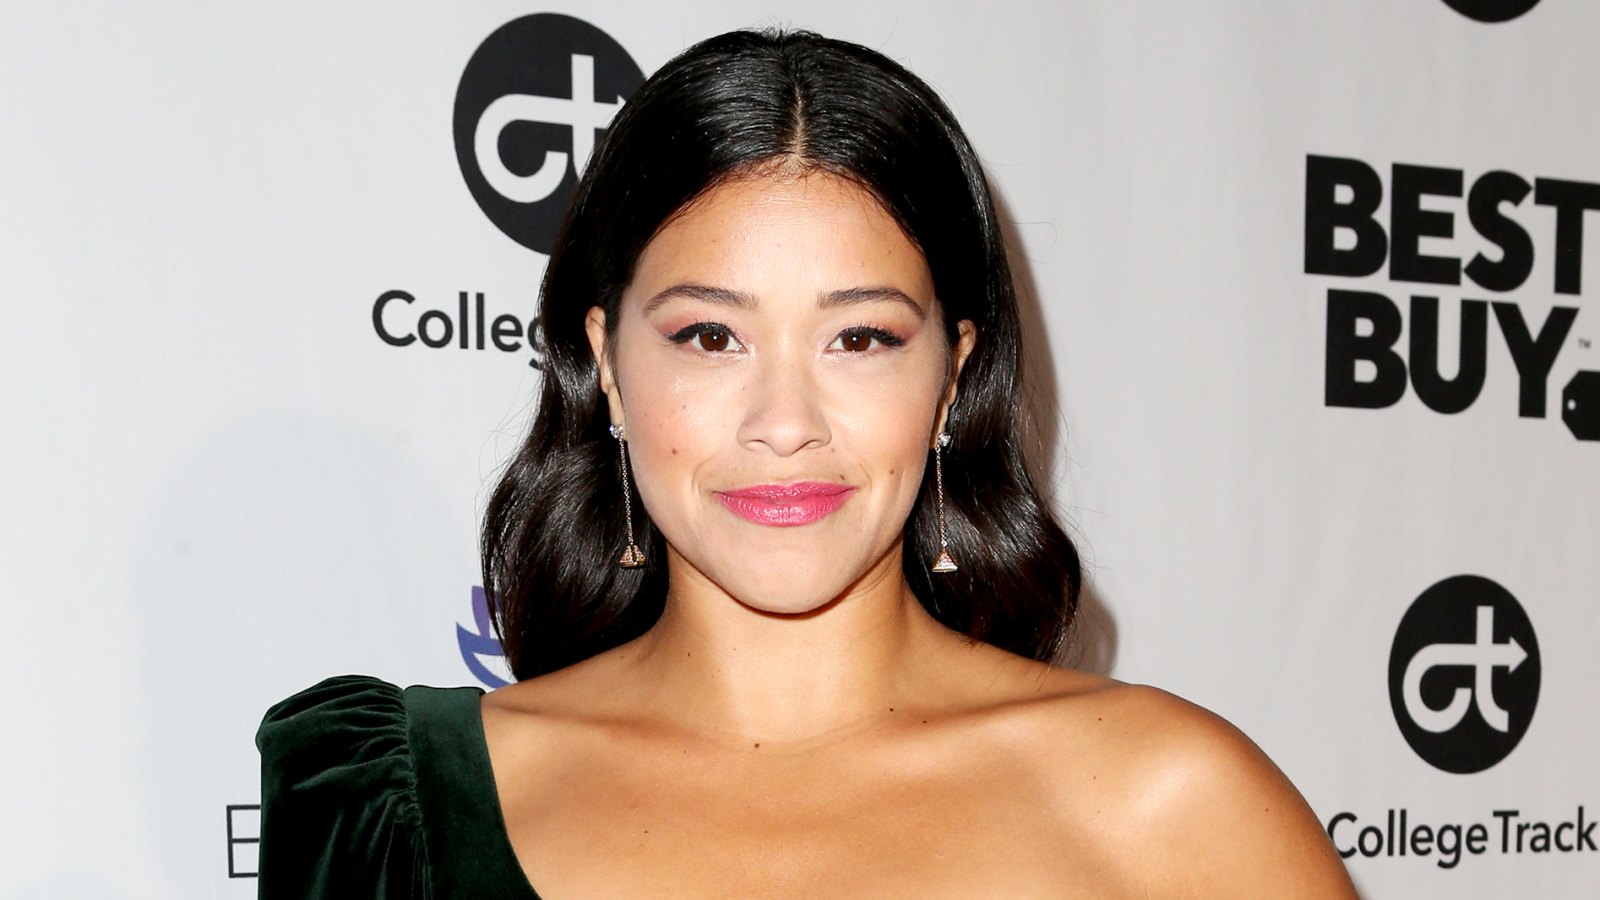 Gina-Rodriguez-Apologies-for-Saying-N-Word-in-Controversial-Instagram-Story-Video-2